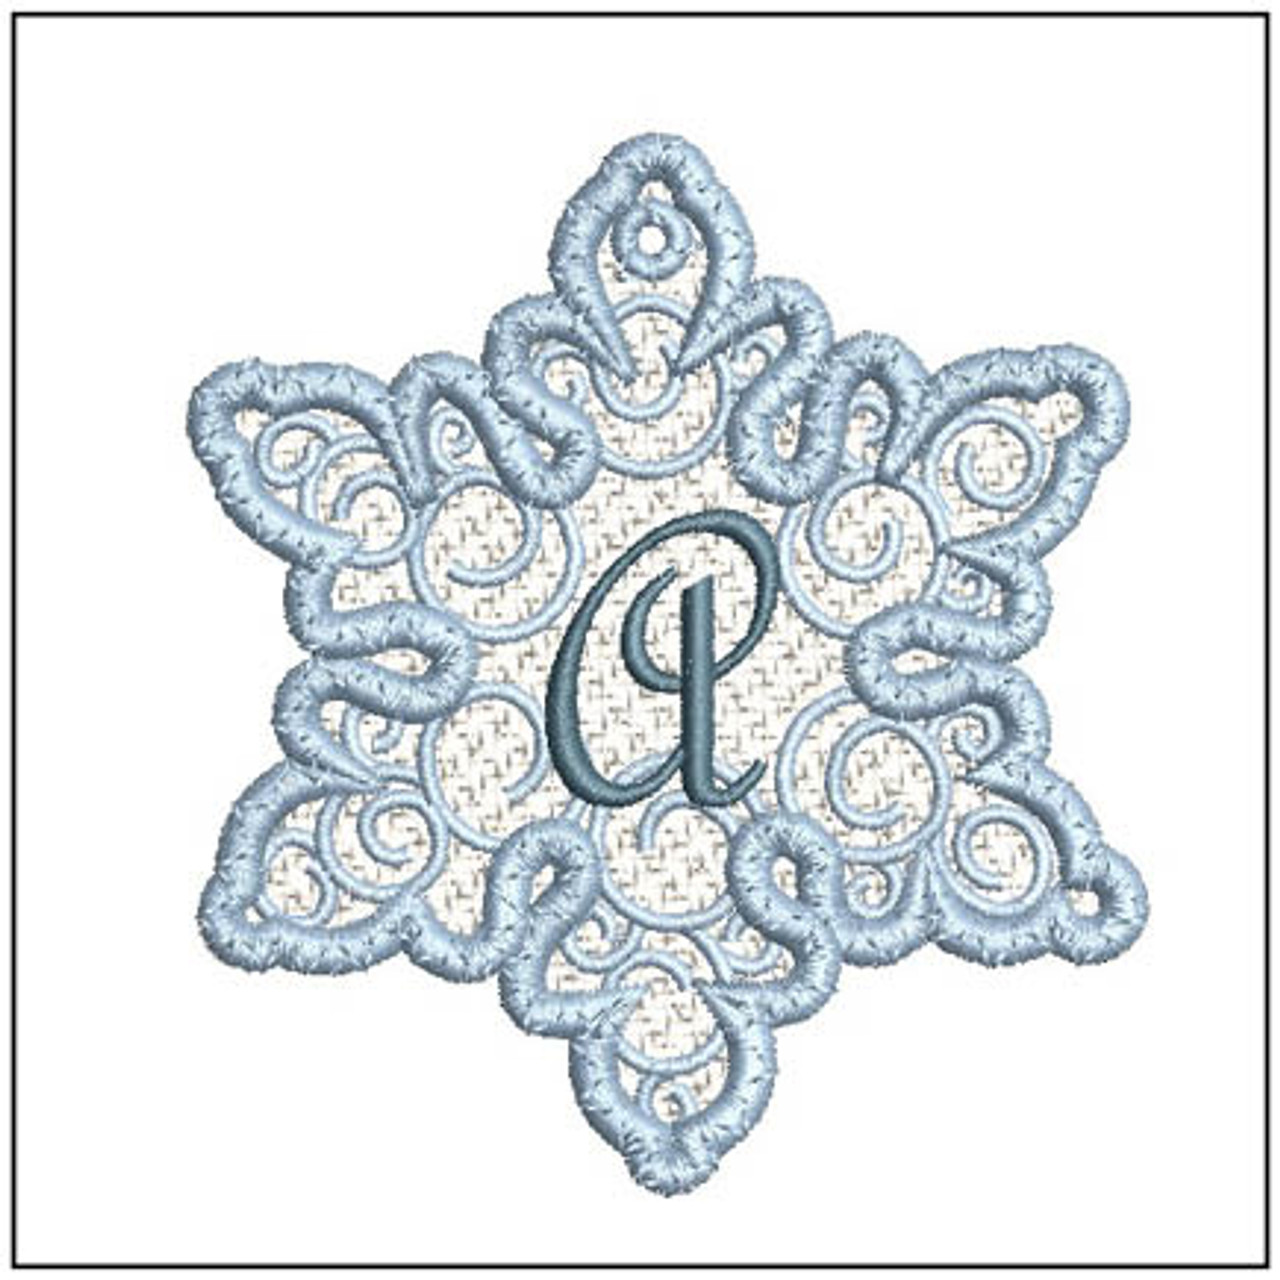 P and S 6 Two-letter Monogram Machine Embroidery Design in 5 Sizes for 4 X  4 and 5 X 7 Hoops 